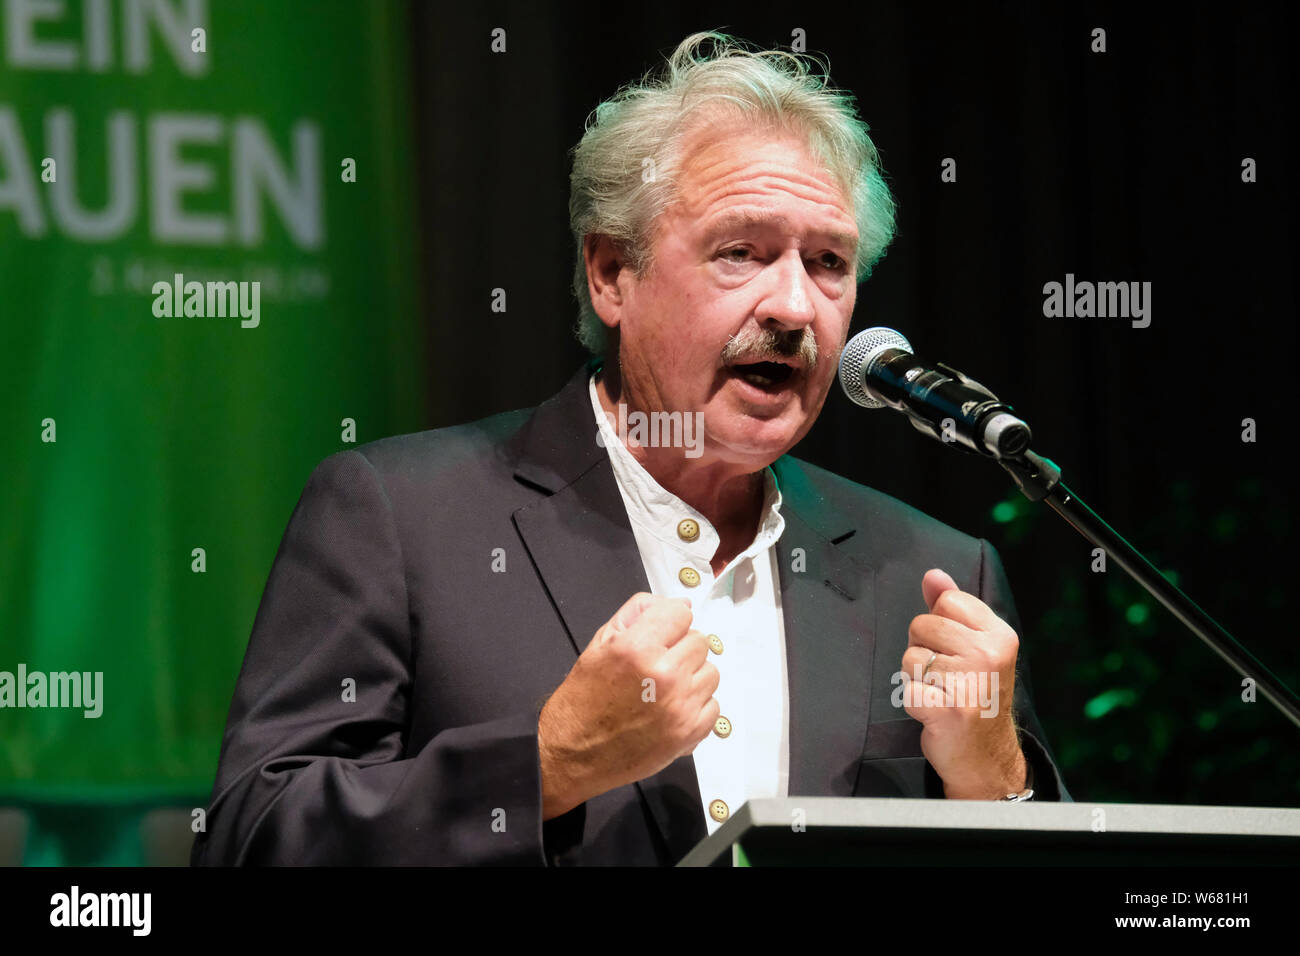 Dortmund / Germany, 22 June 2019. JEAN ASSELBORN, Luxembourg Foreign Minister, since 2014 also Minister for Immigration and Asylum. Speech at the Protestant Church Congress 2019 in Dortmund Stock Photo